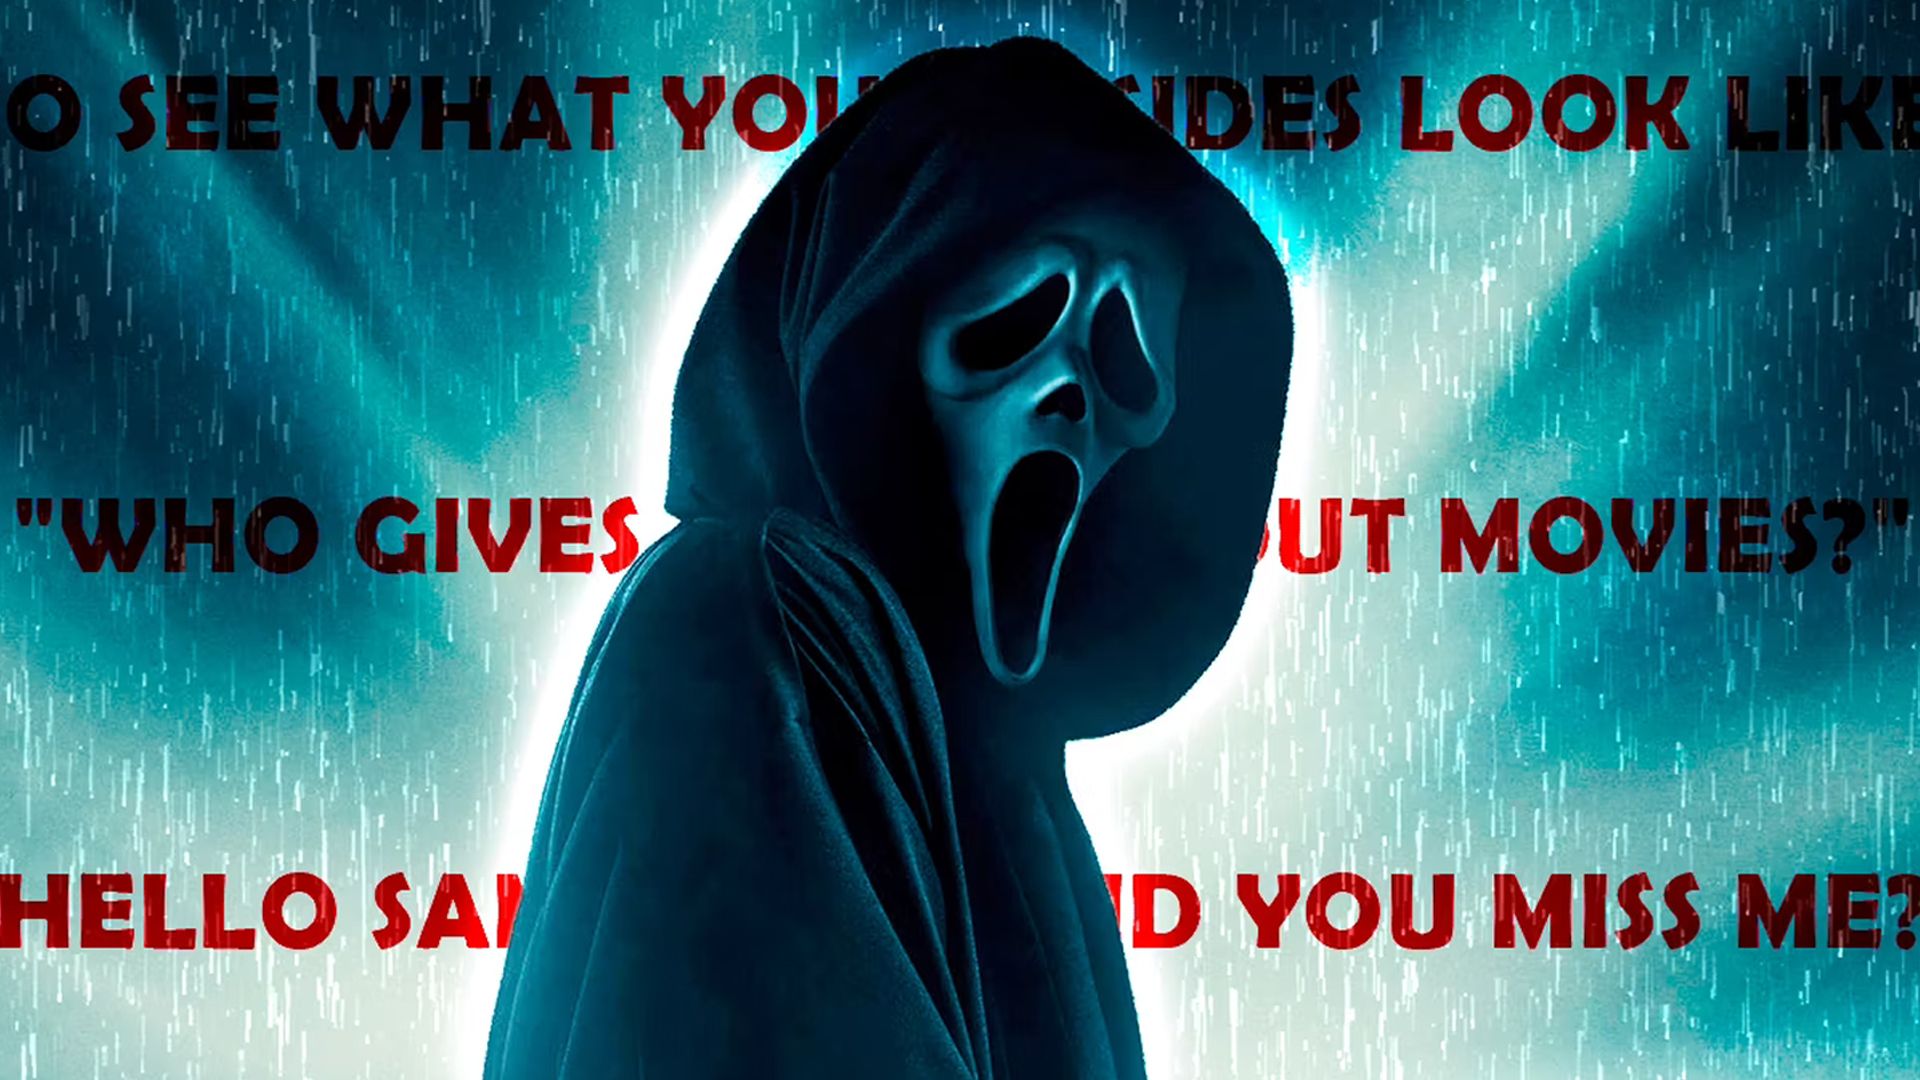 Scream 6 image reveals a slightly different look for Ghostface